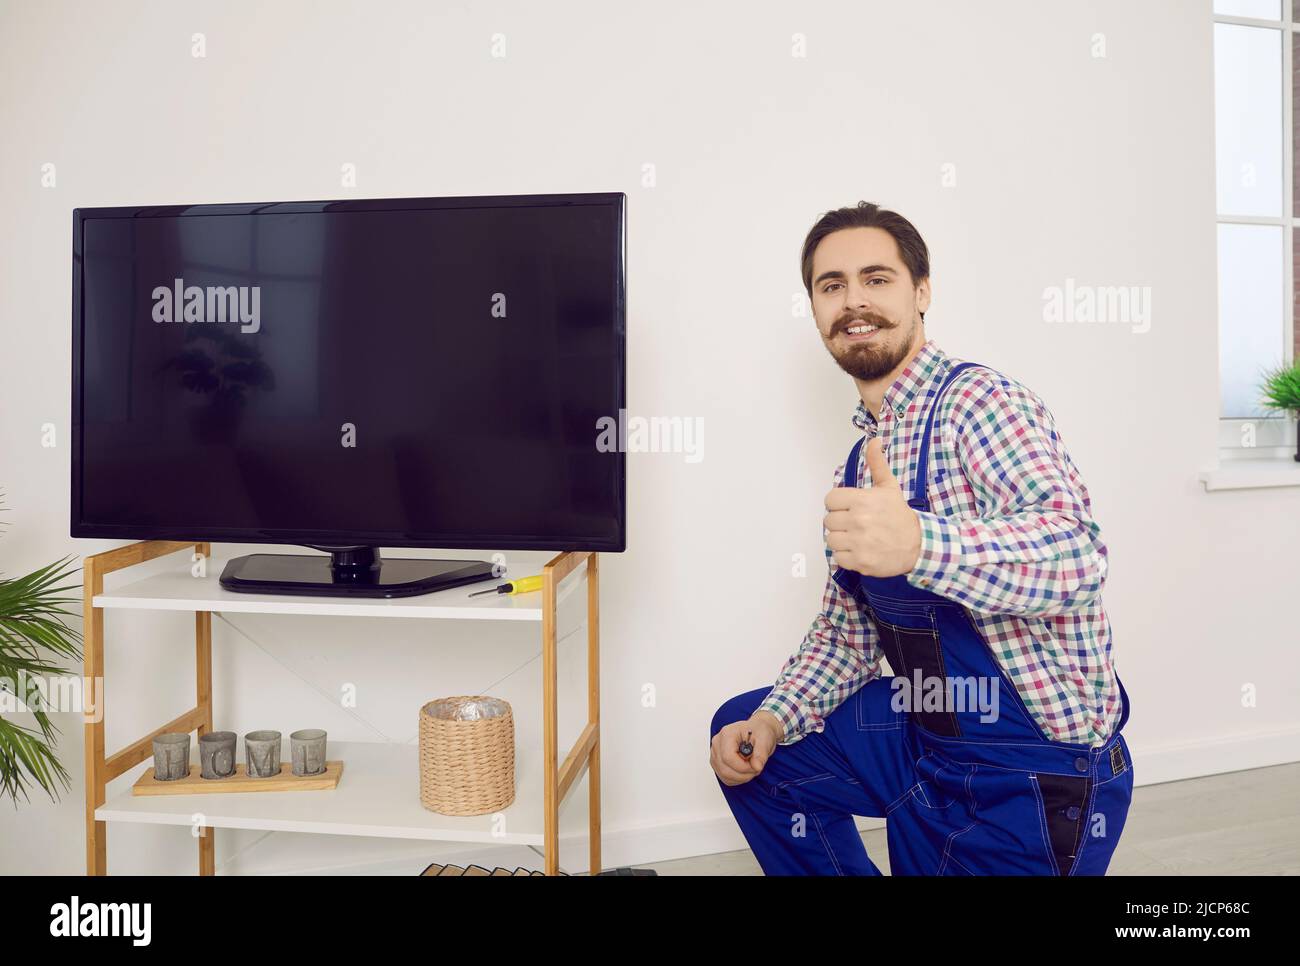 Happy technician showing thumbs up after he has repaired or installed television set Stock Photo